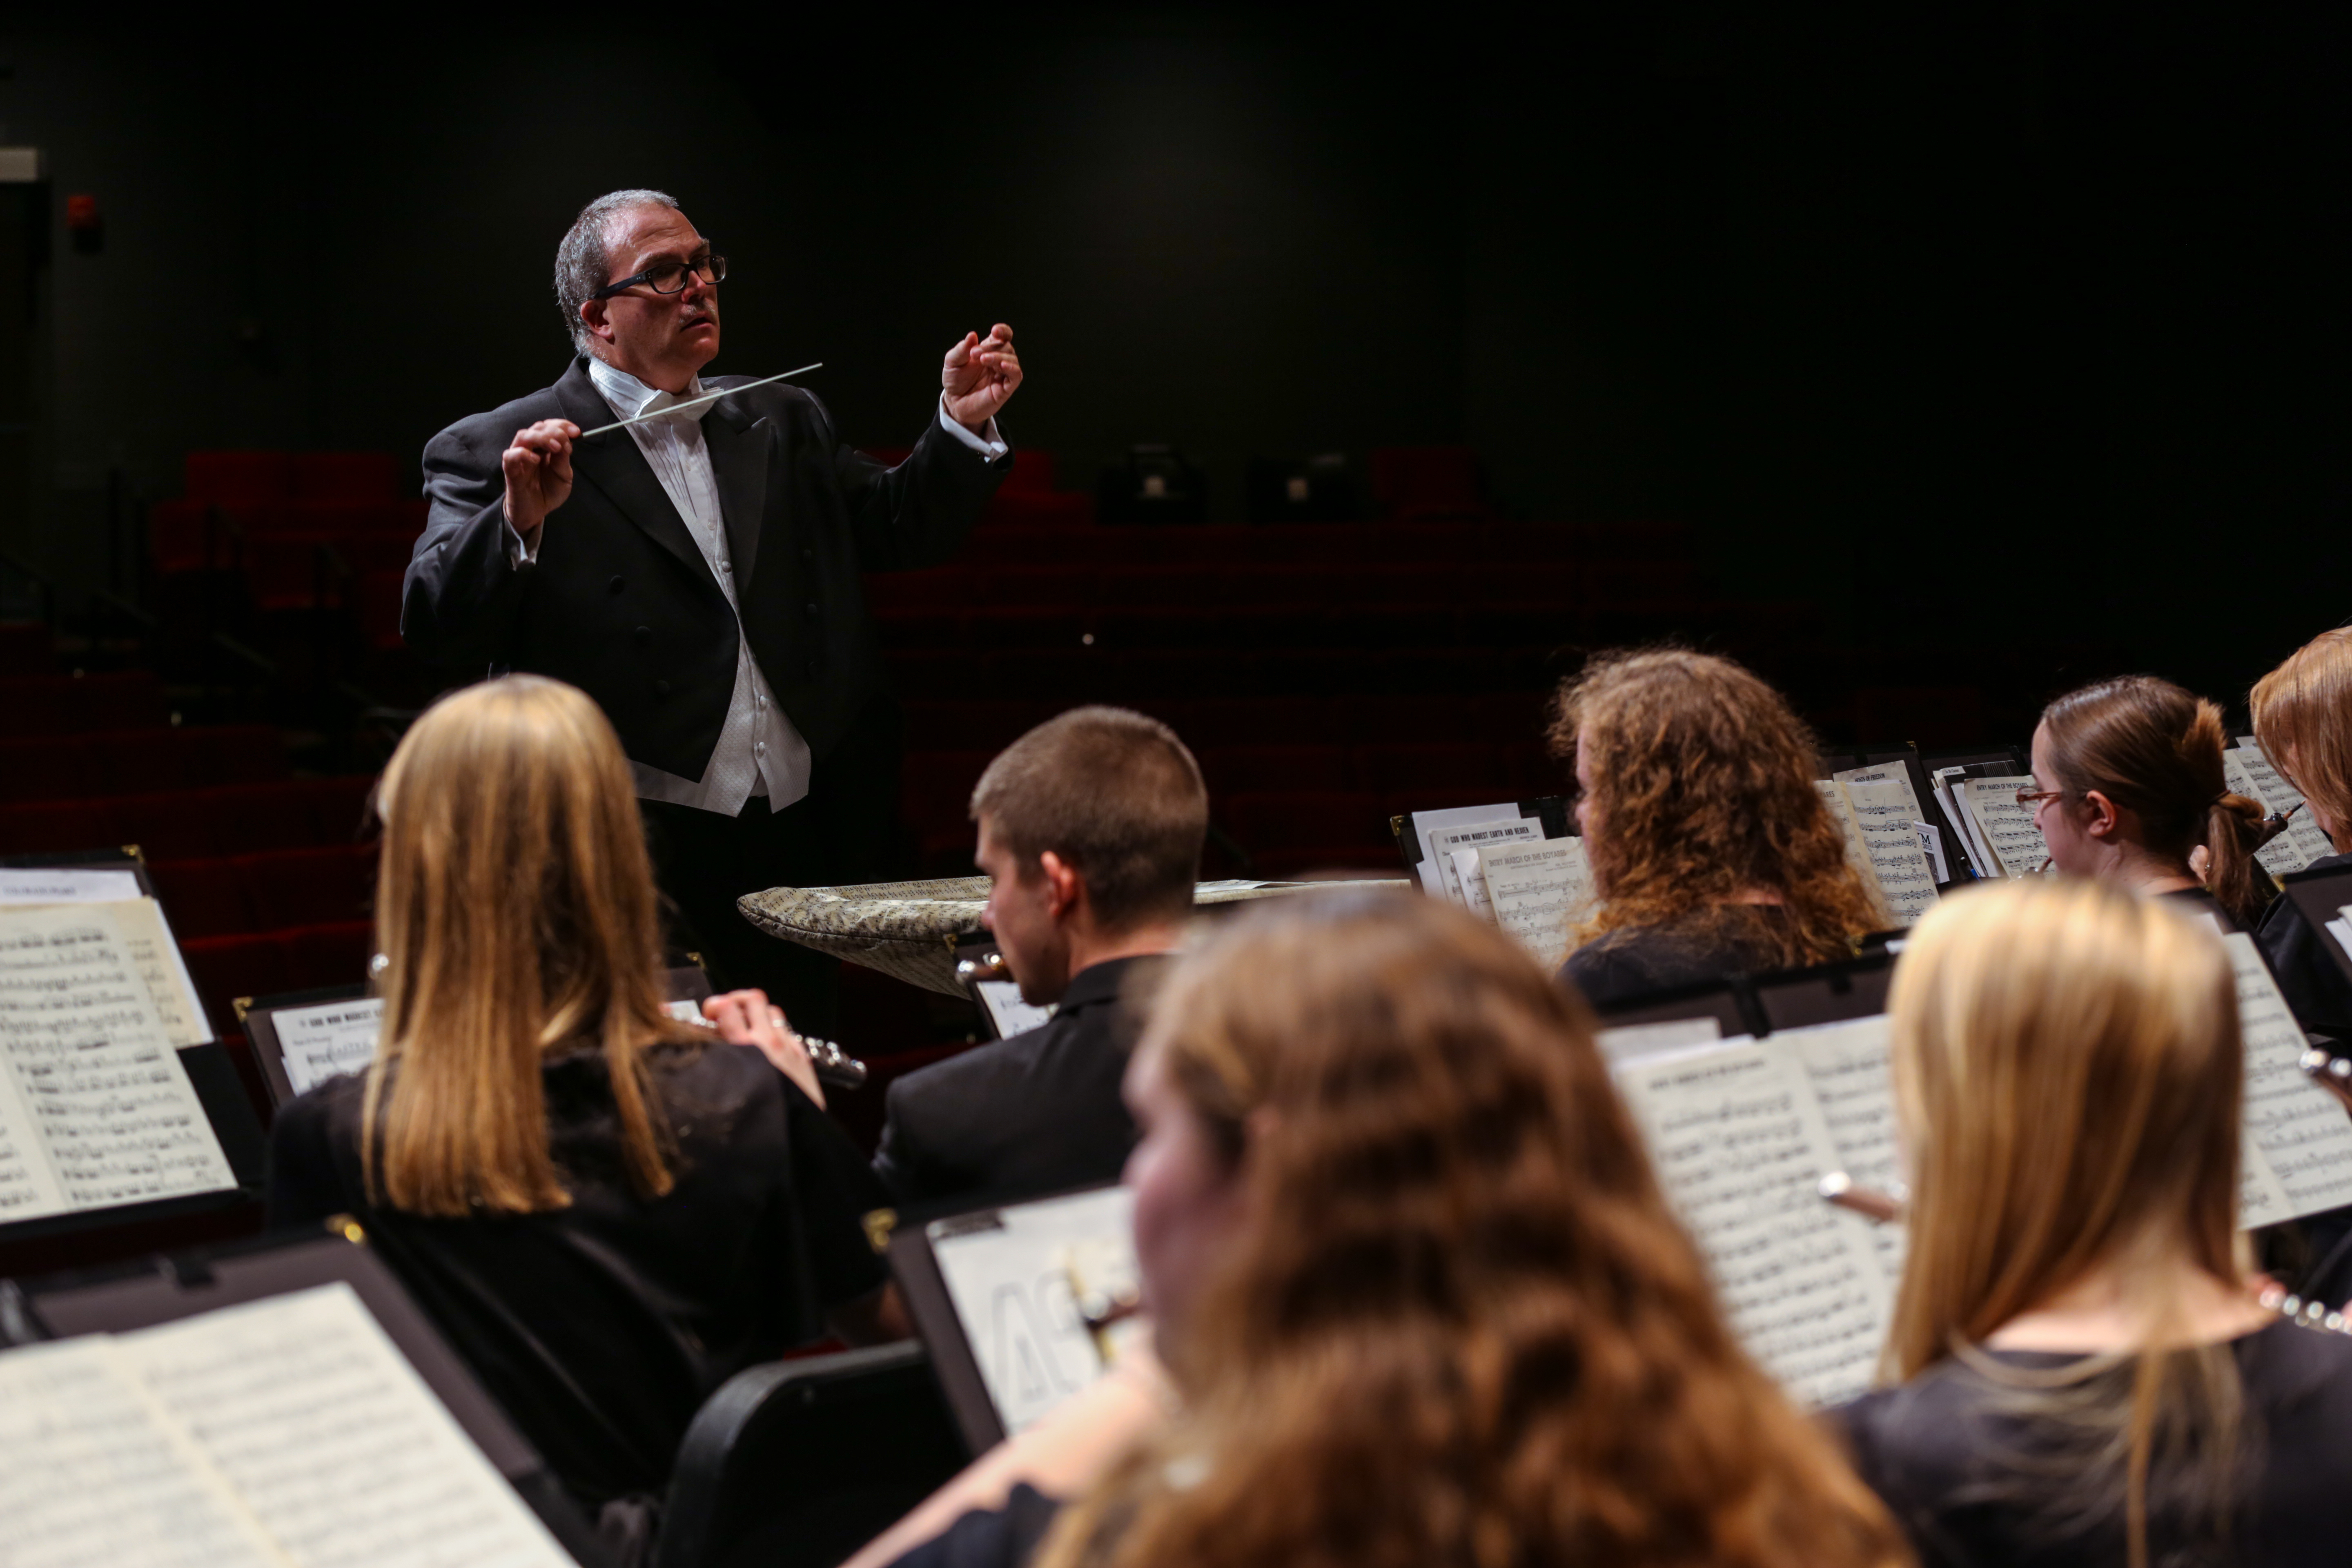 Chris White conducting students